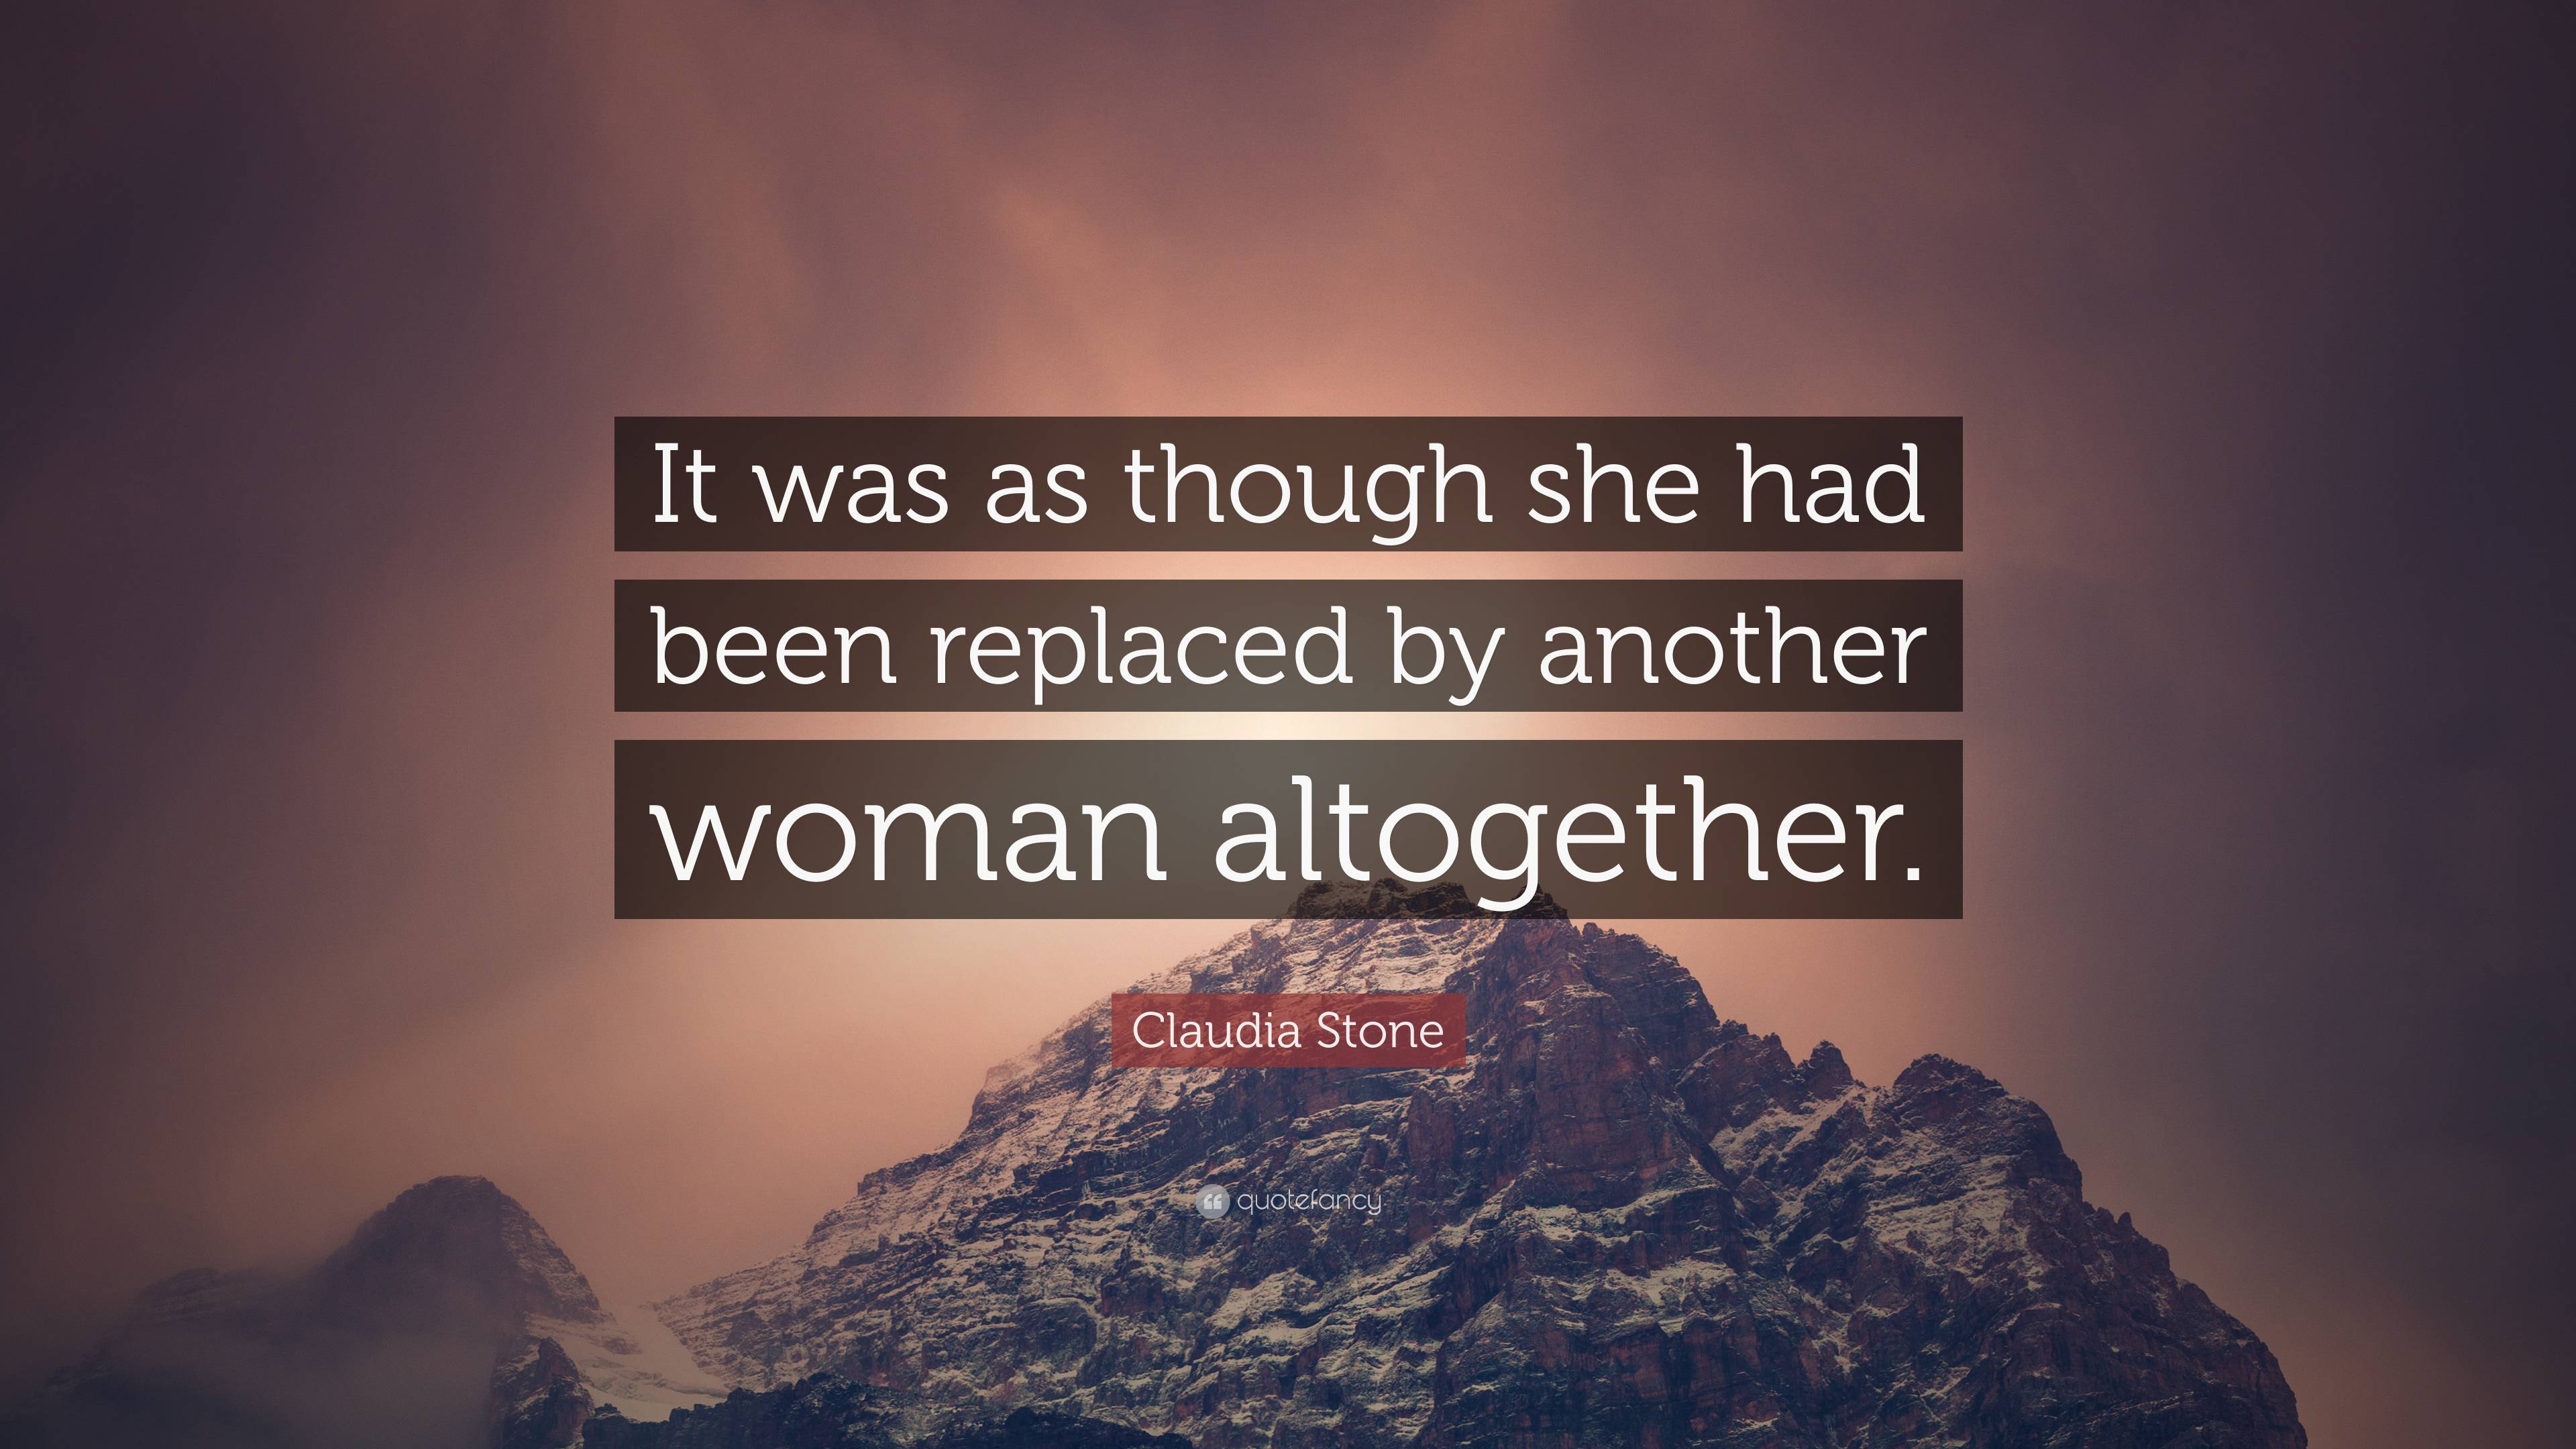 Claudia Stone Quote: “It was as though she had been replaced by another ...